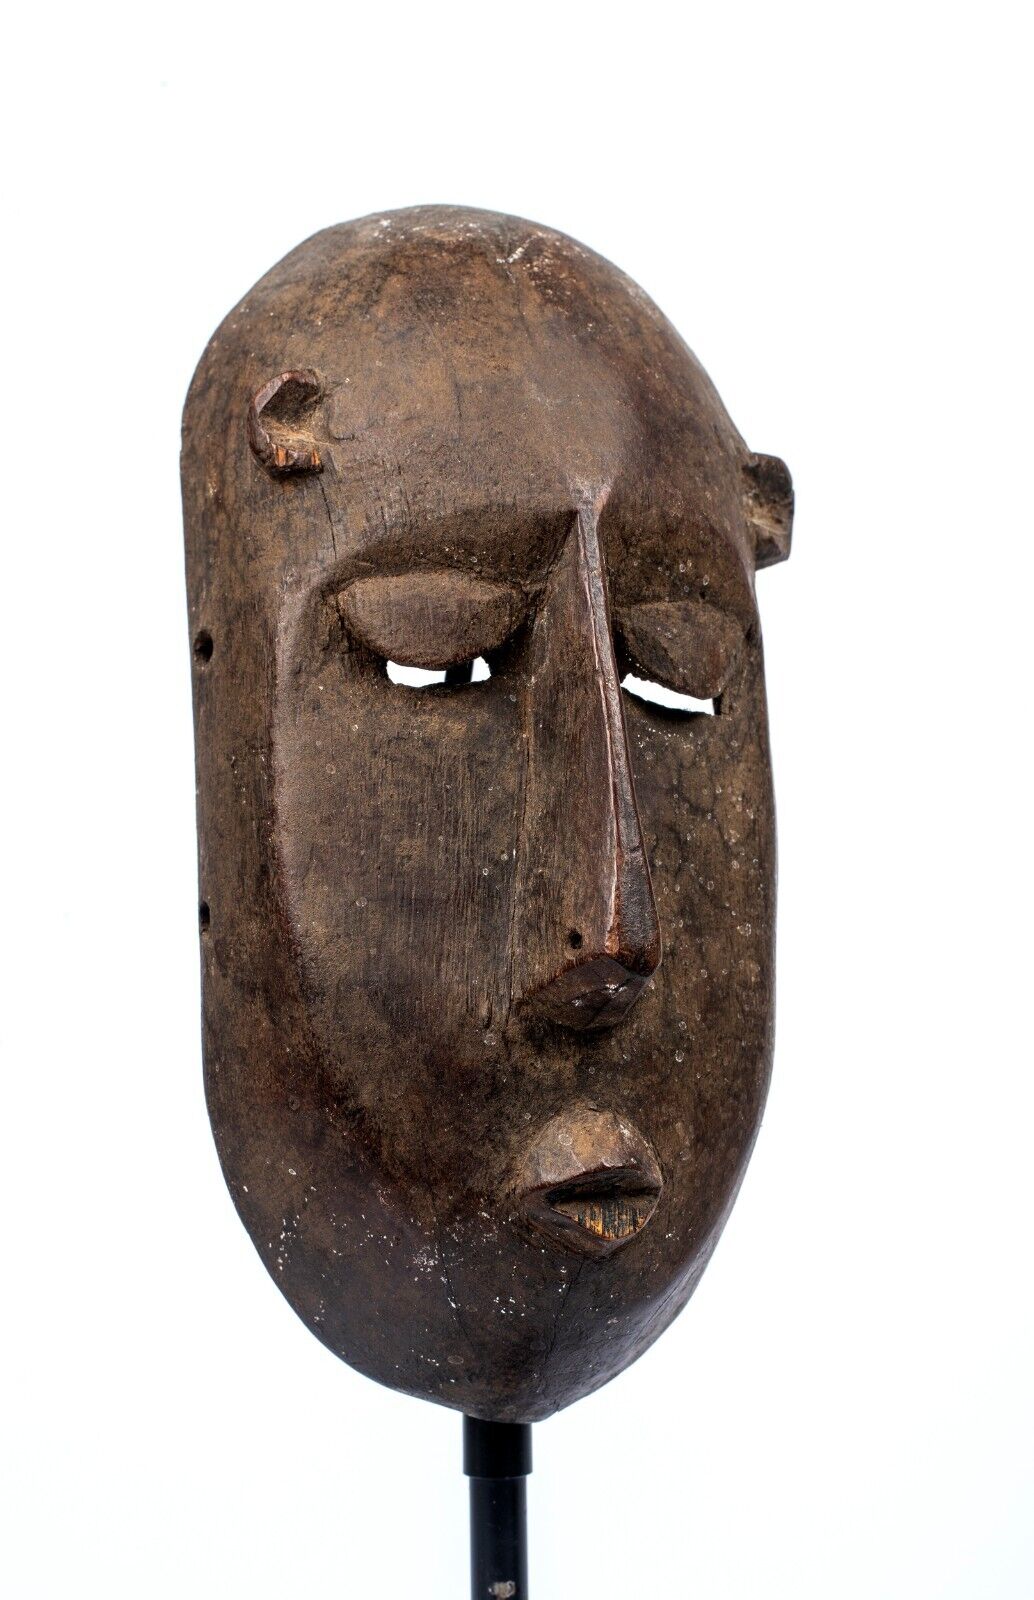 A Central or East African Mask